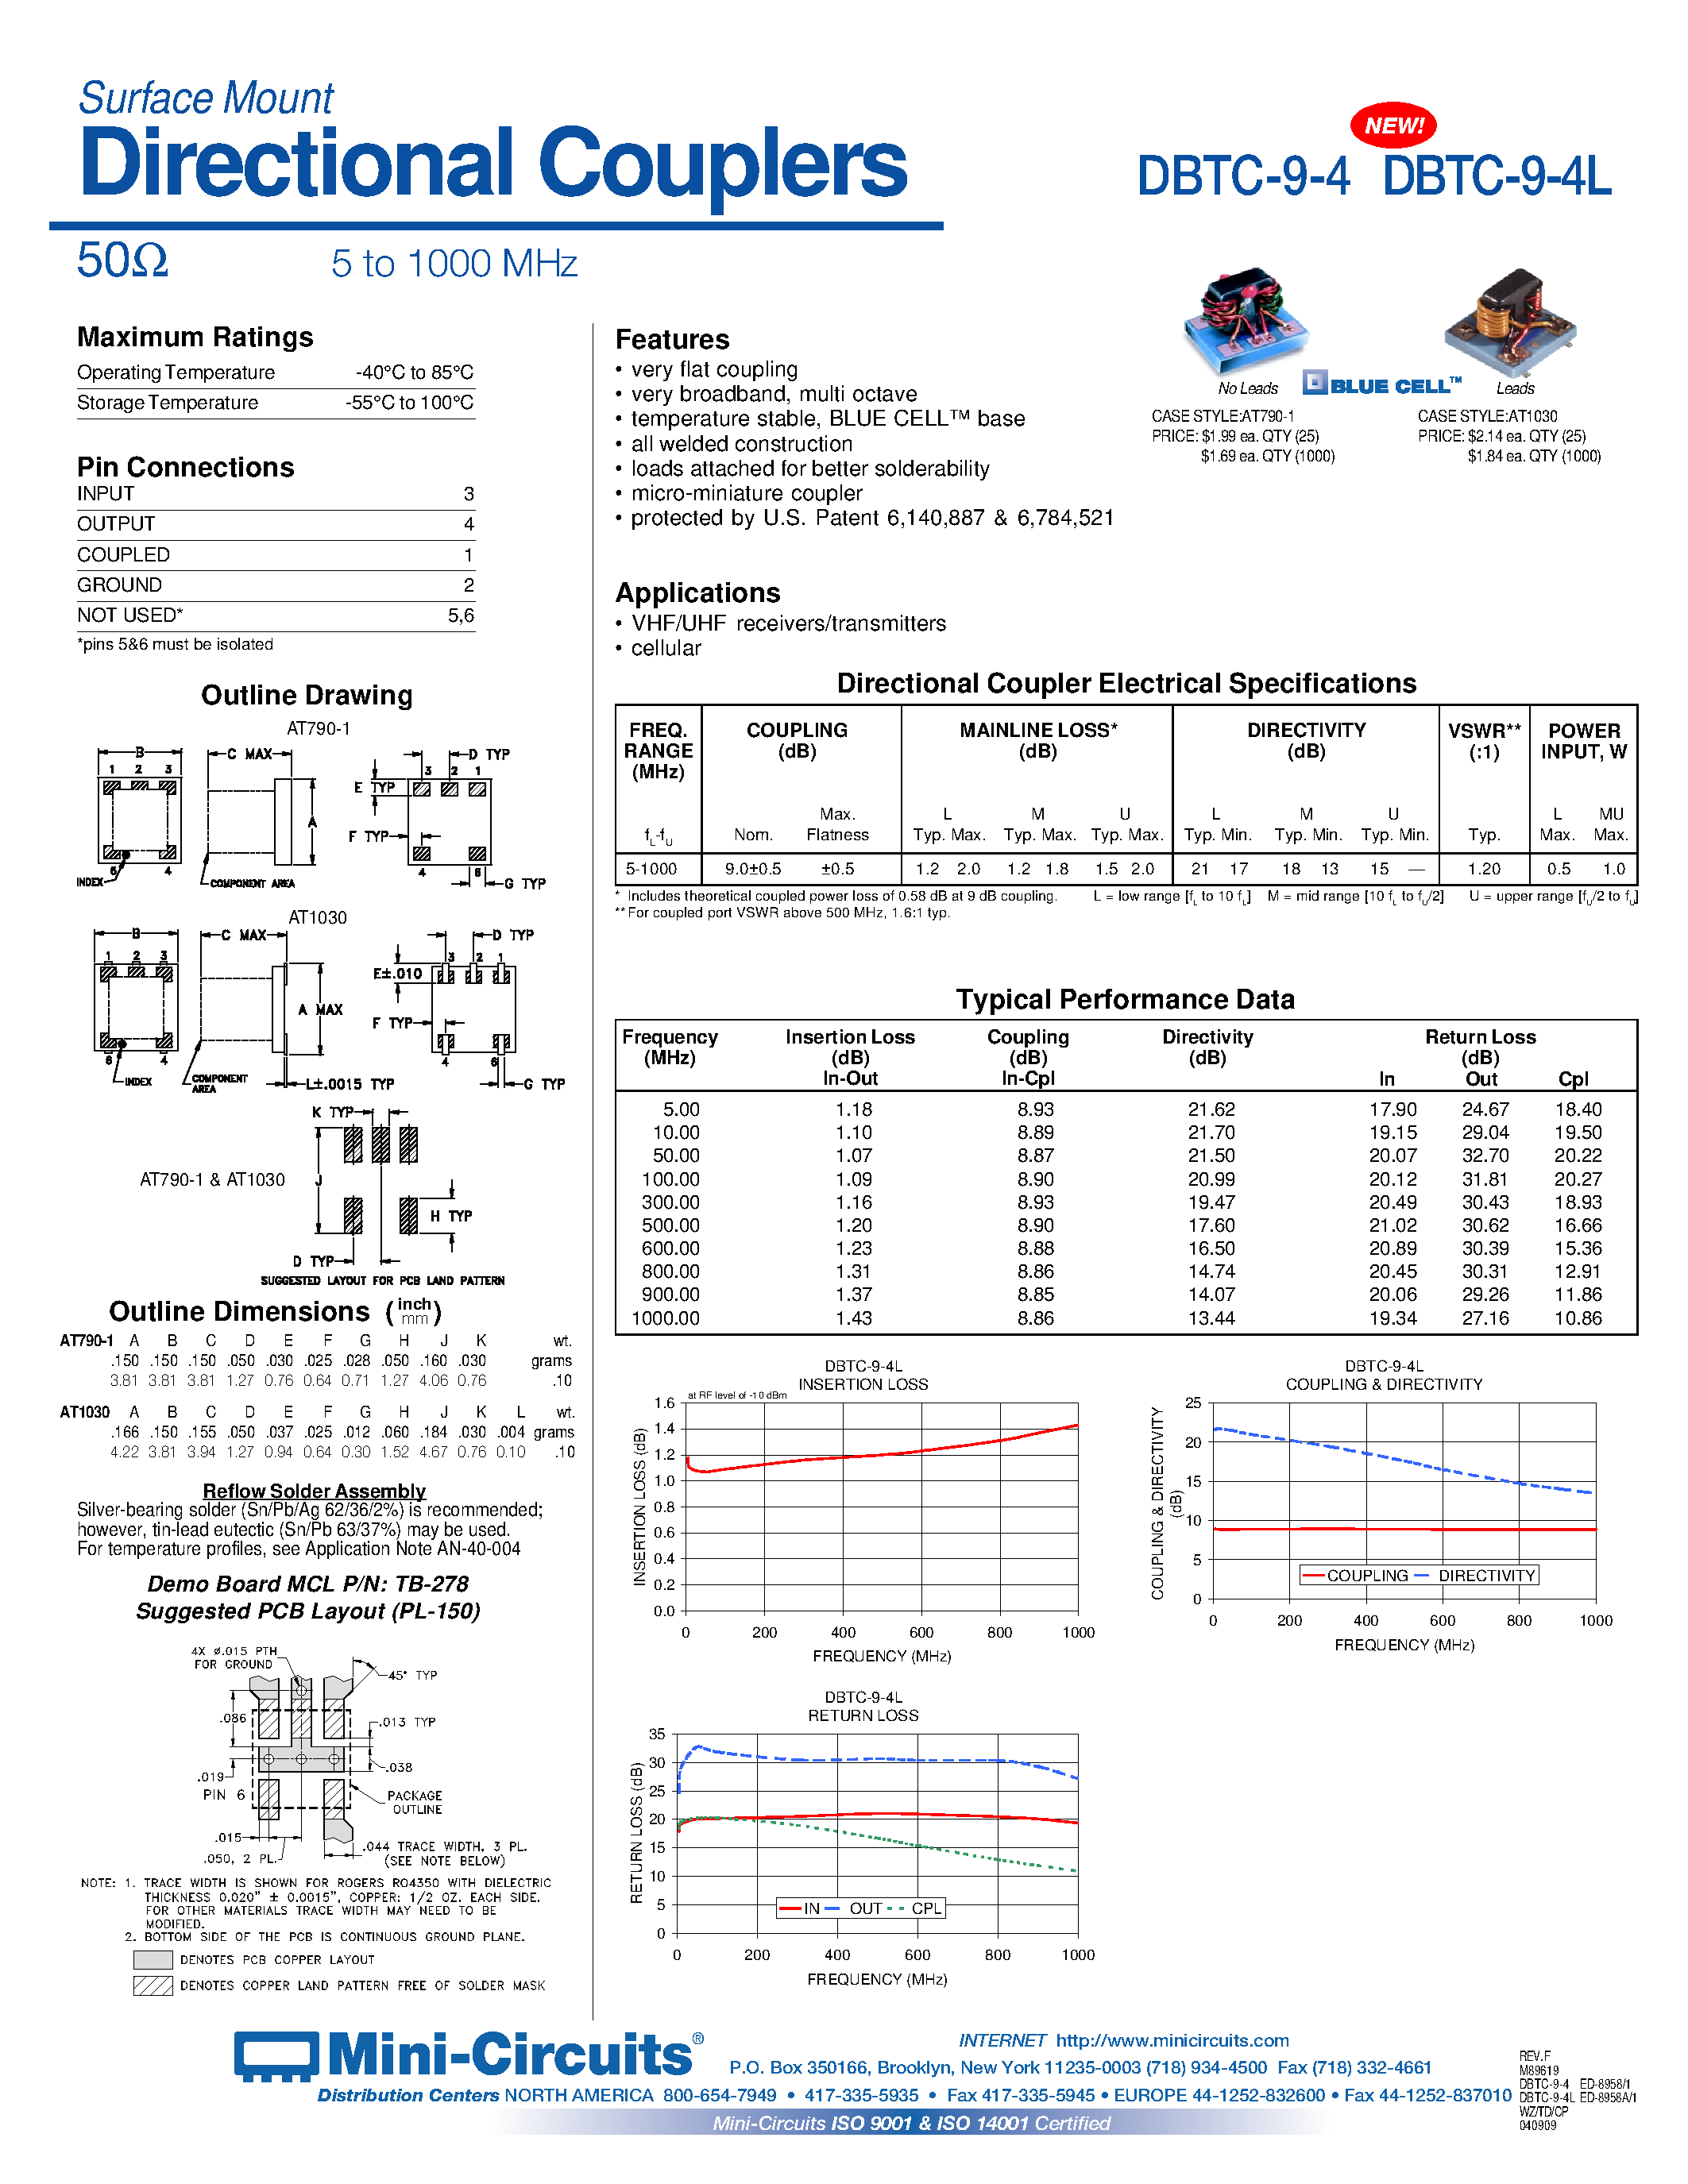 Datasheet DBTC-9-4L - Surface Mount Directional Couplers 50 5 to 1000 MHz page 1